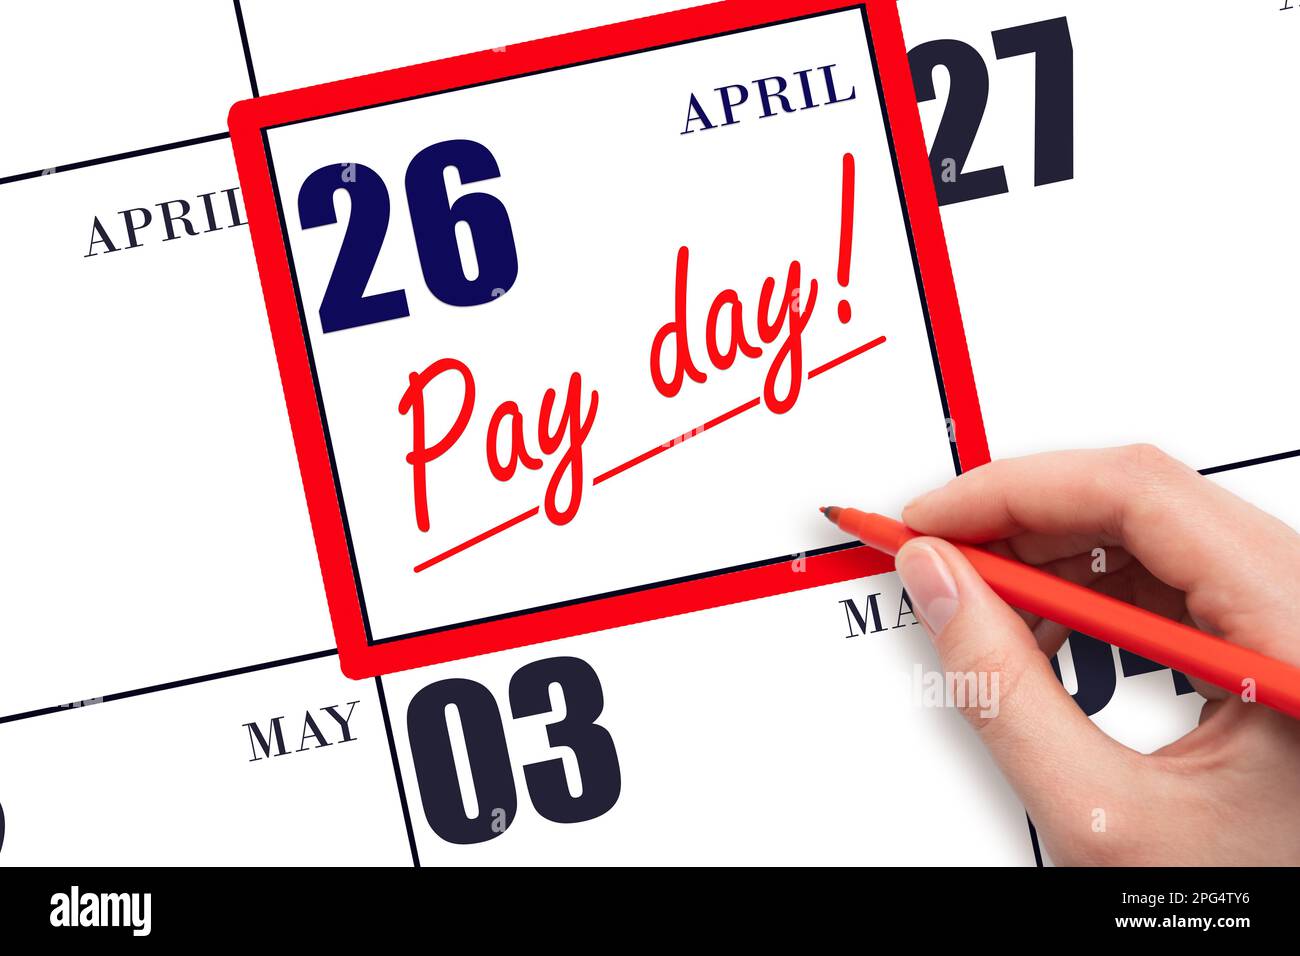 26th day of April. Hand writing text PAY DATE on calendar date April 26 and underline it. Payment due date. Reminder concept of payment. Spring month, Stock Photo